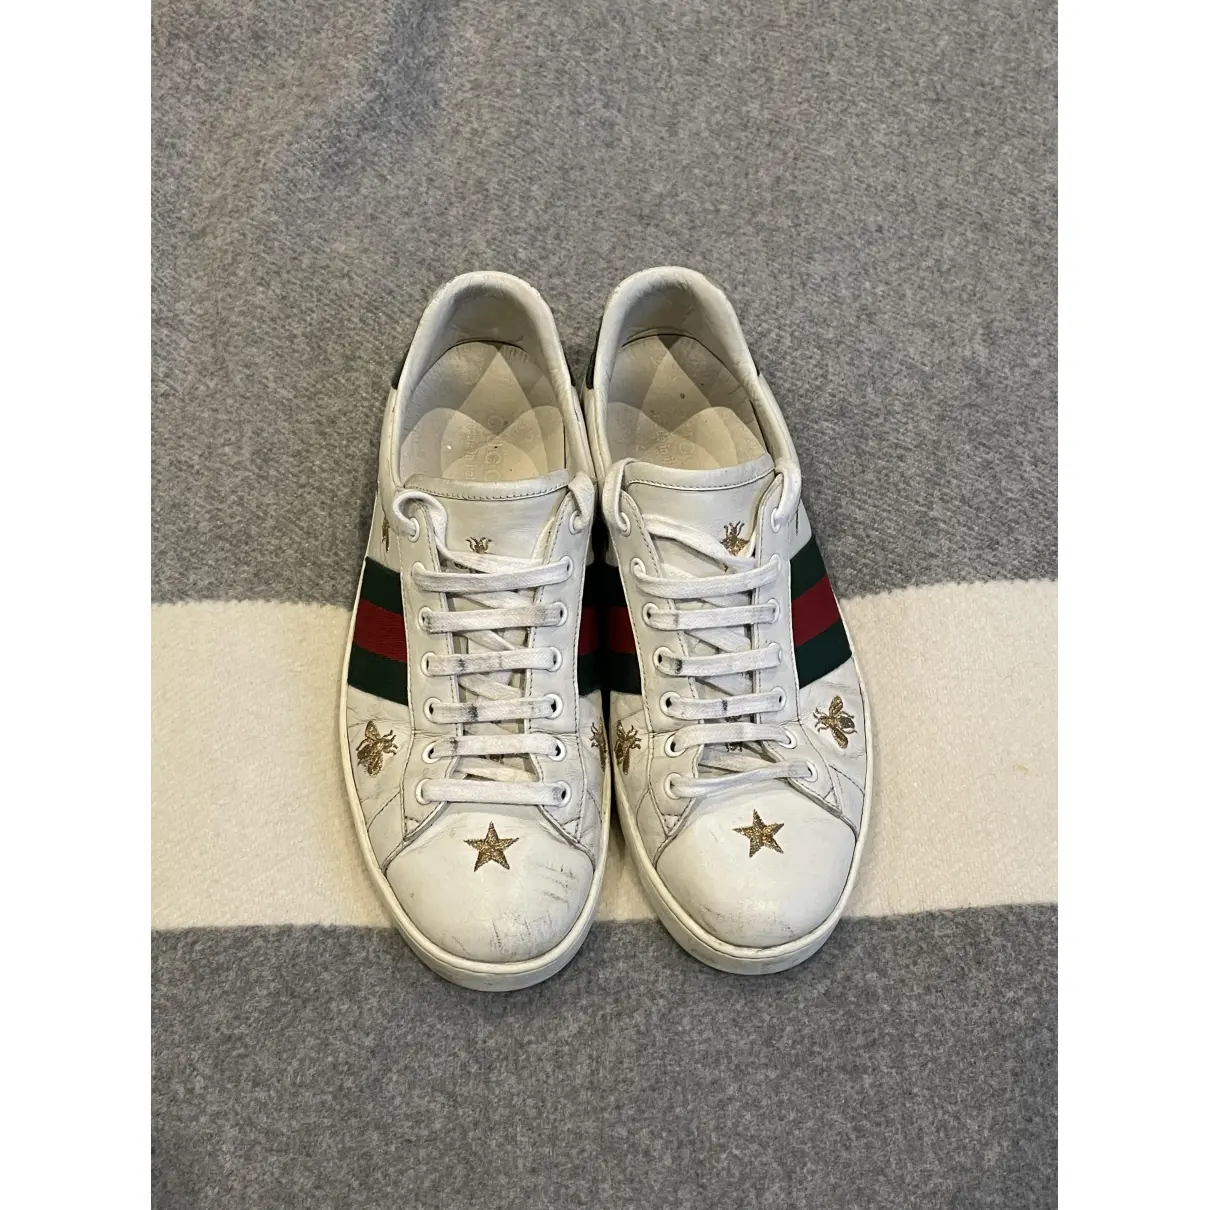 Buy Gucci Ace low trainers online